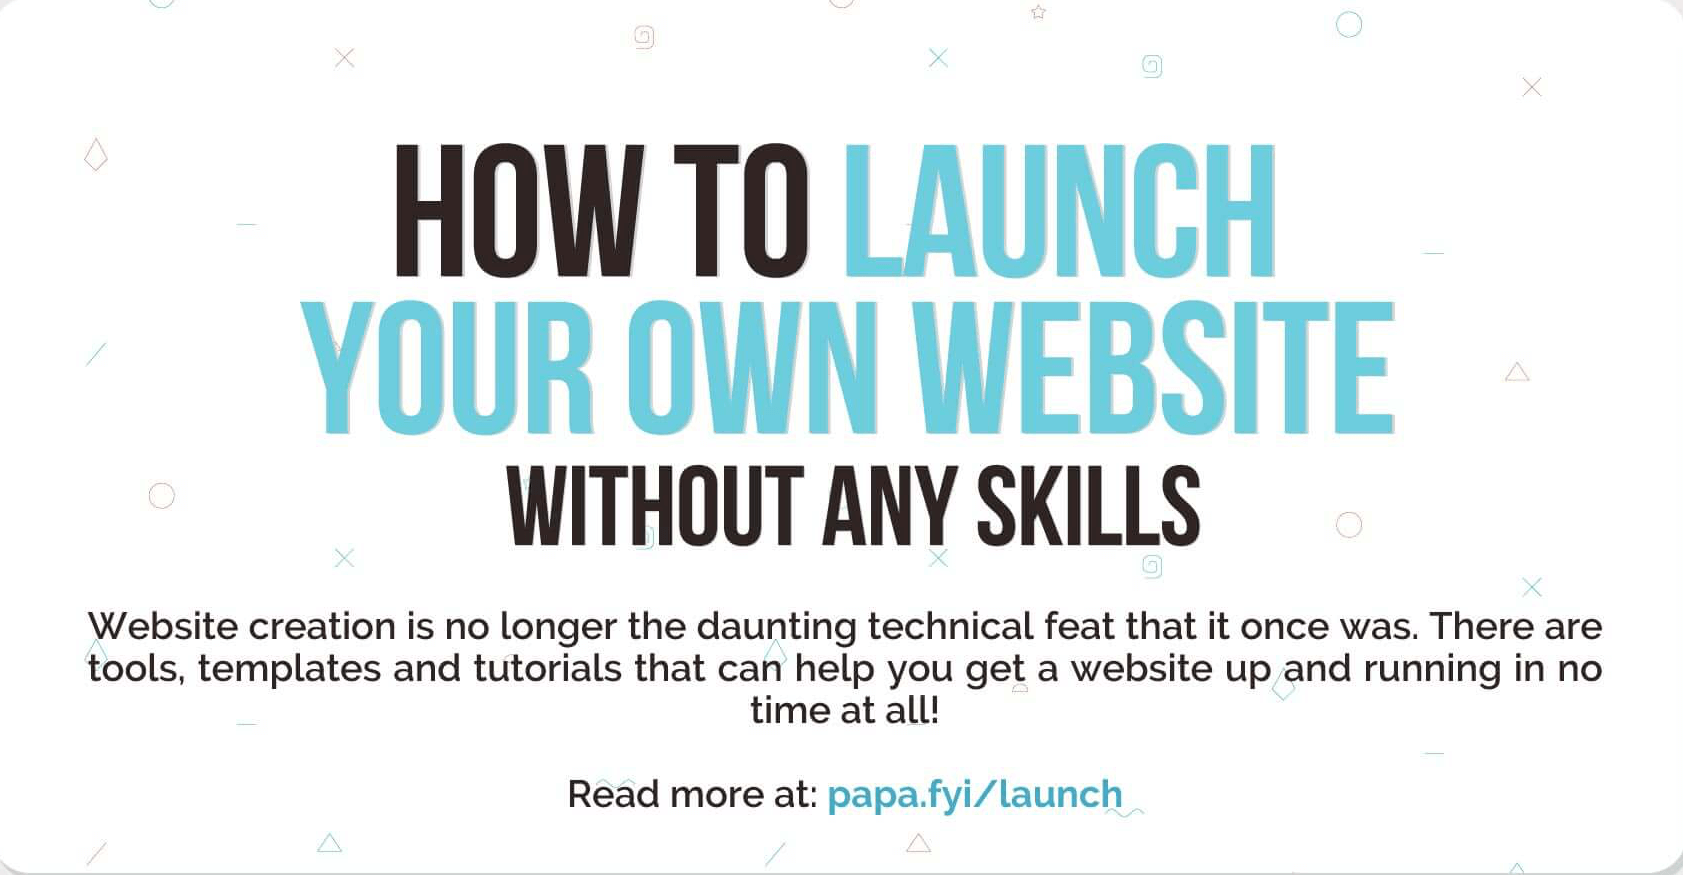 How to launch your website without any skills